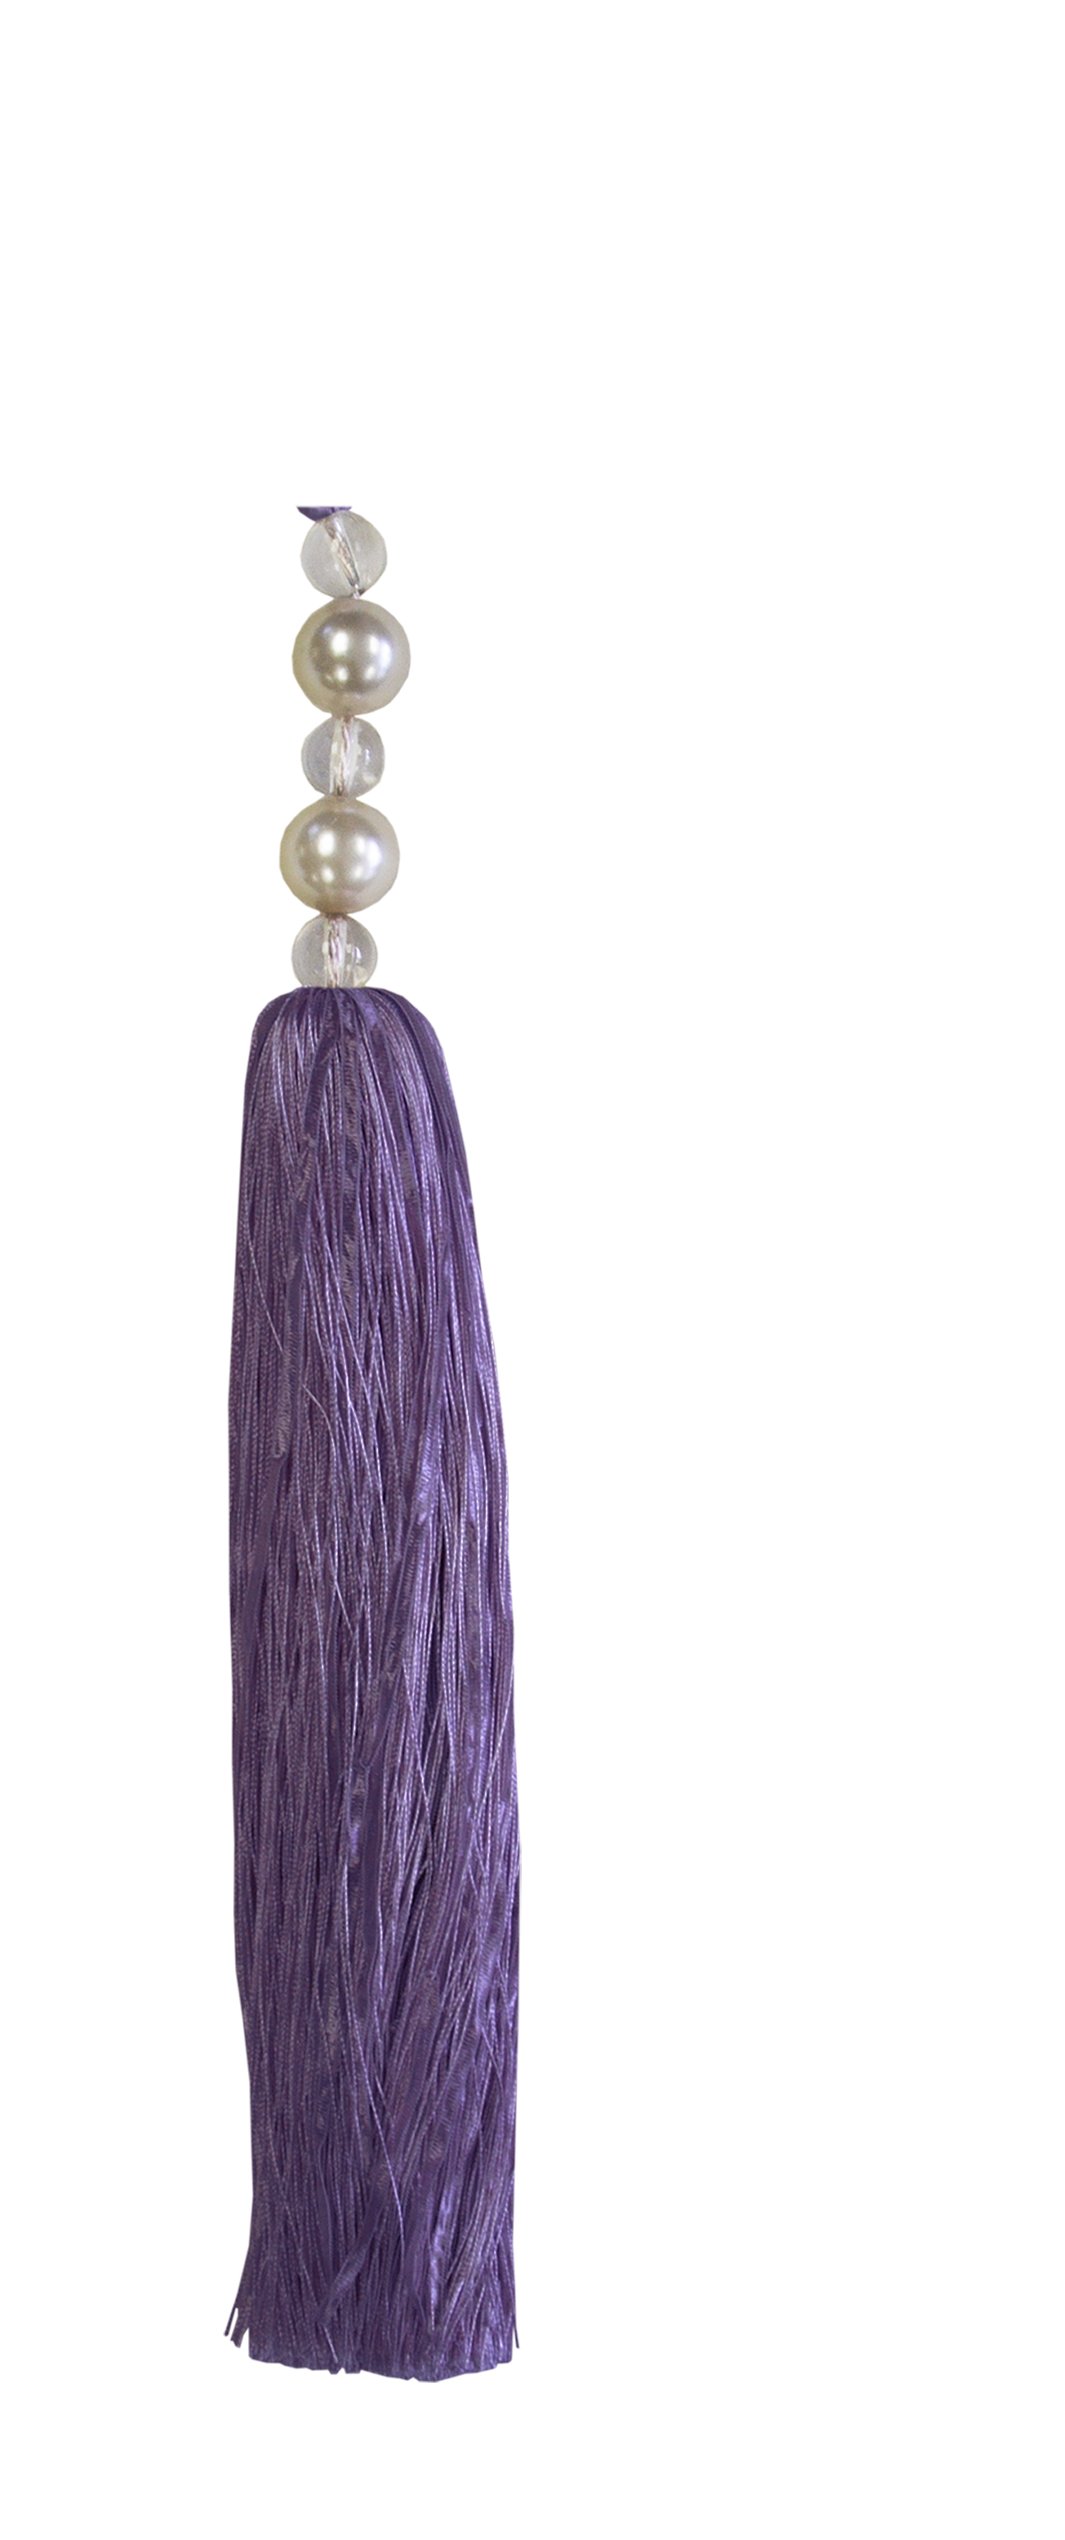 Tassel with Pearl Top - Mauve 25cm